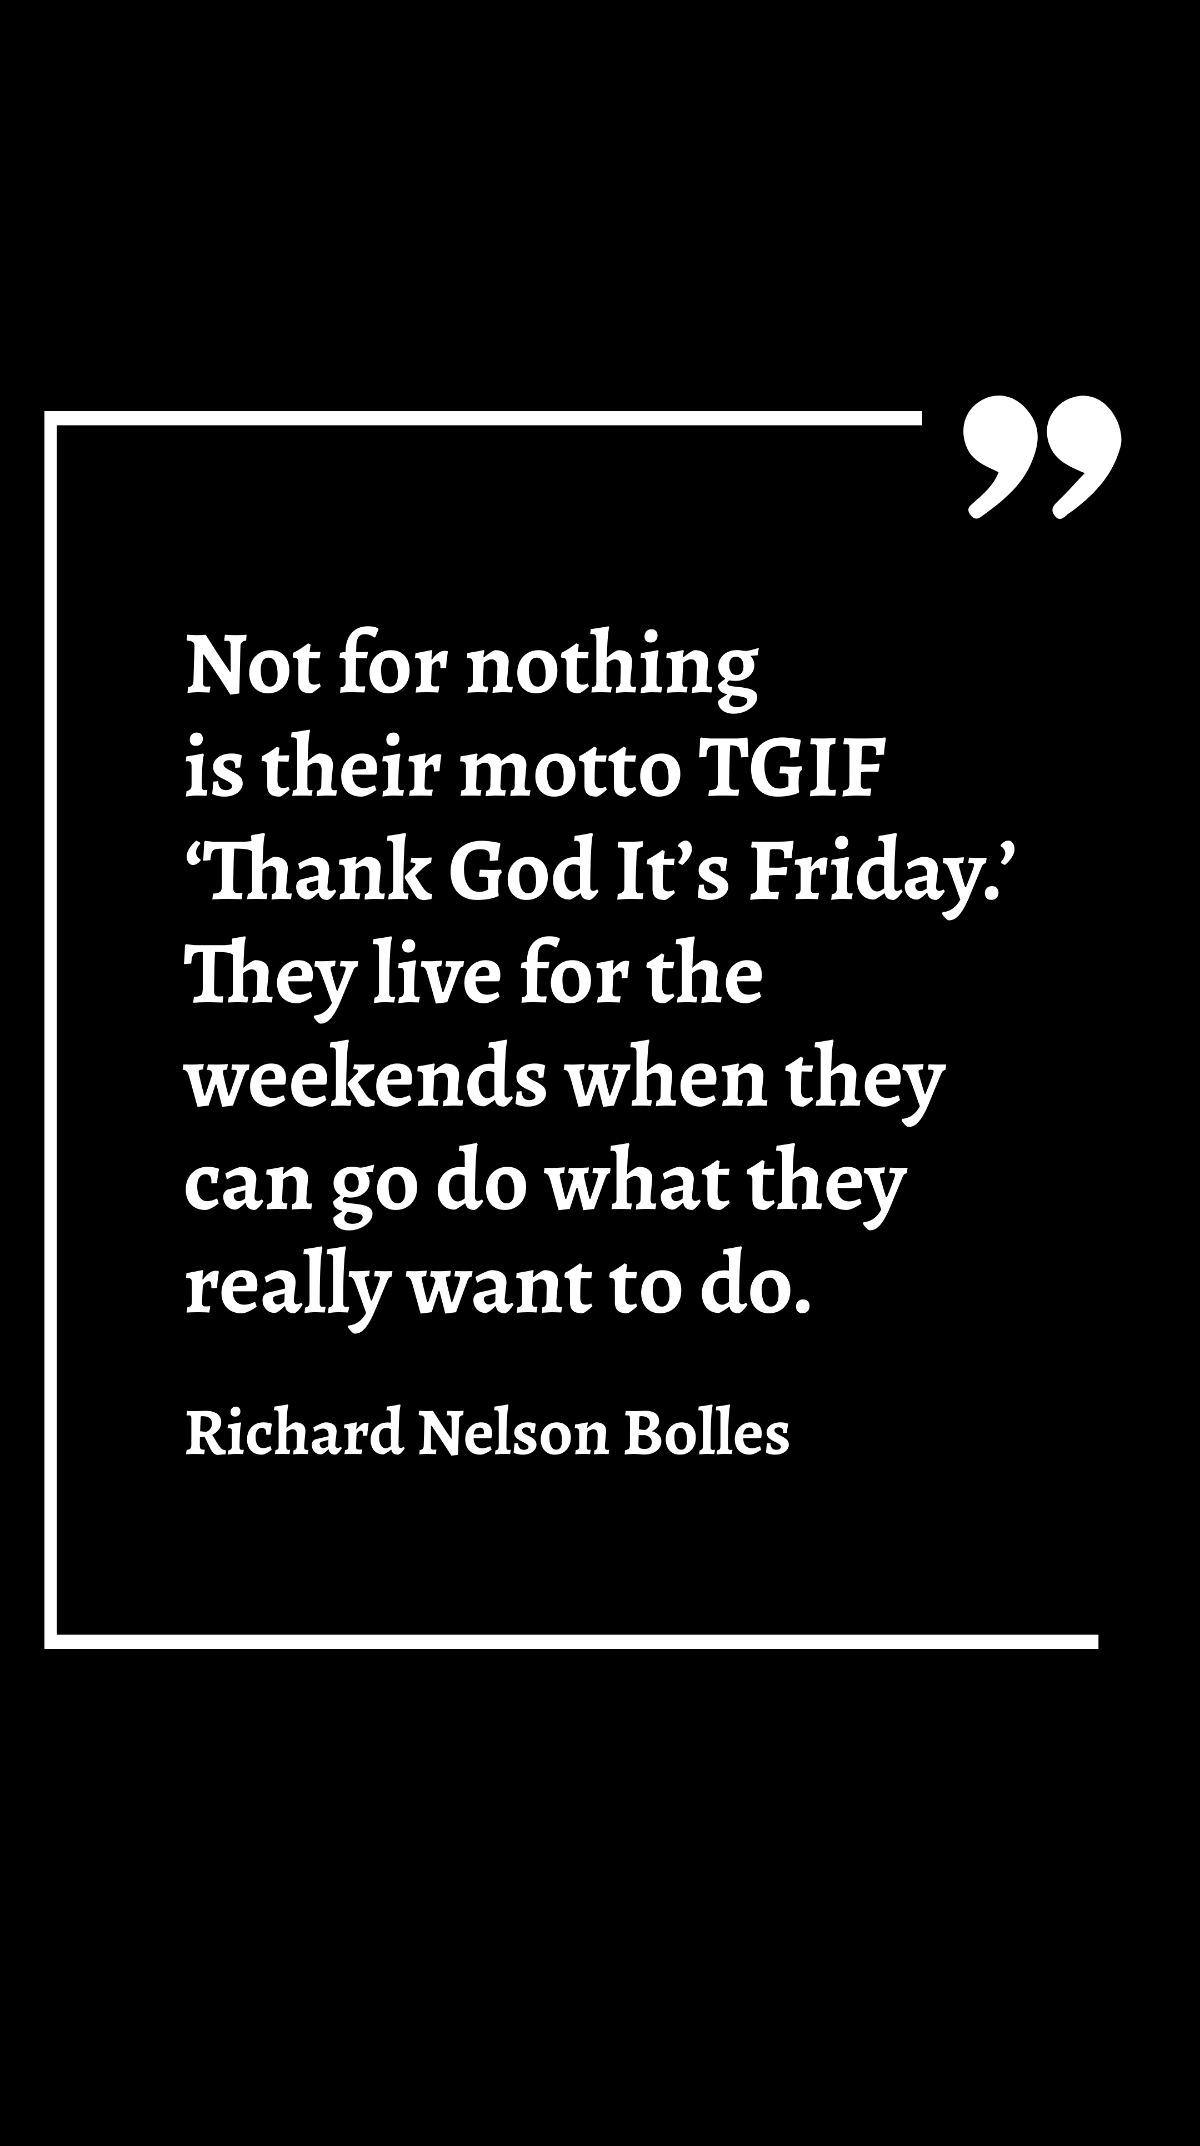 Free Richard Nelson Bolles - Not for nothing is their motto TGIF ‘Thank God It’s Friday.’ They live for the weekends when they can go do what they really want to do. Template